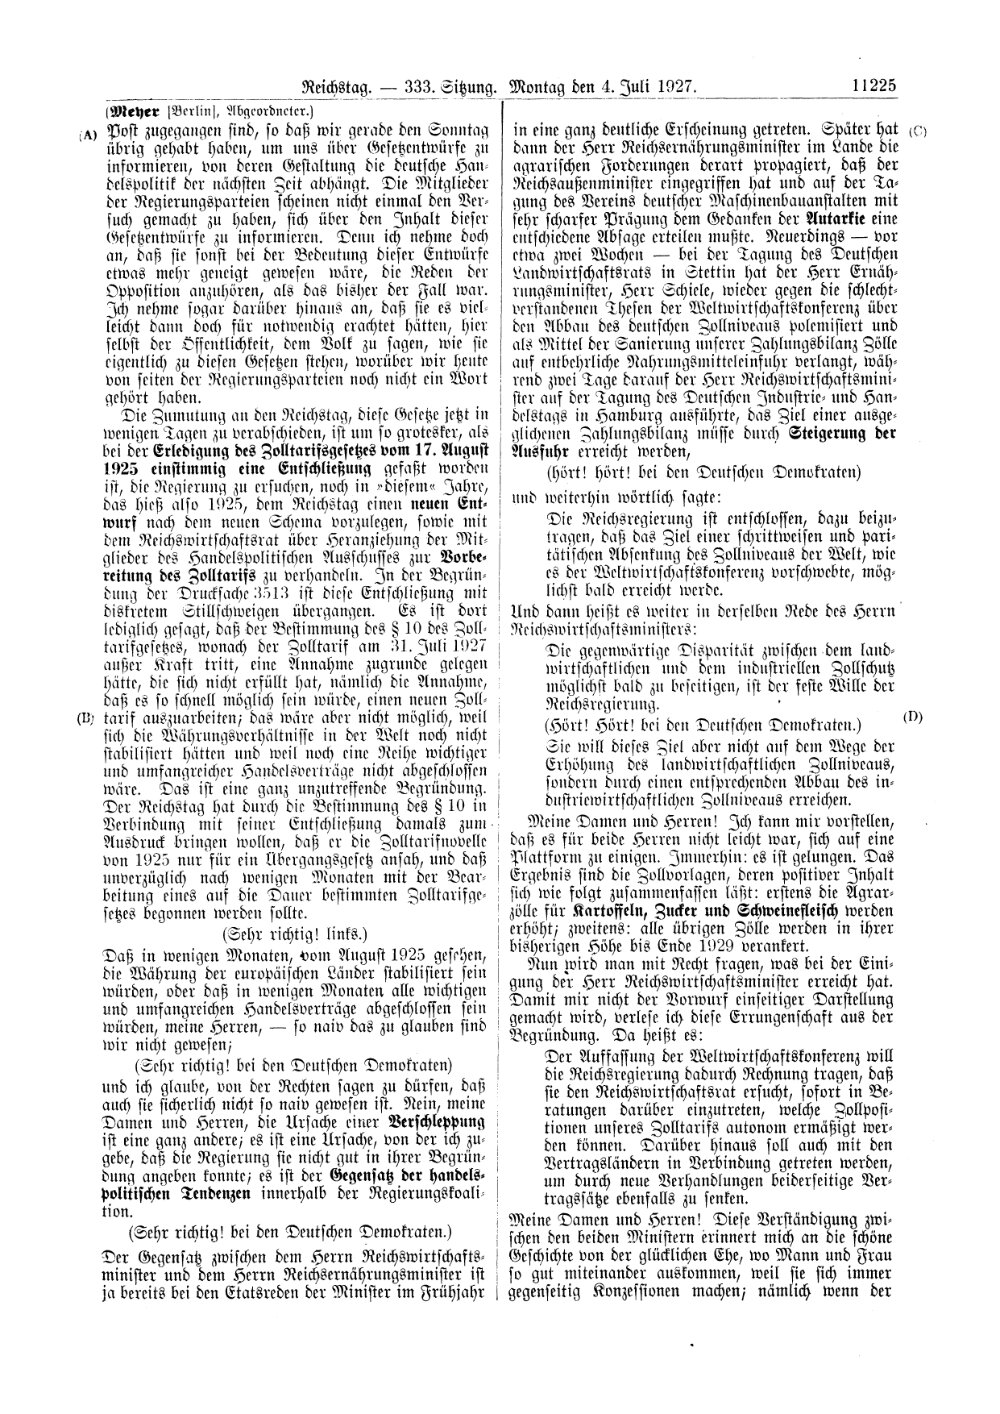 Scan of page 11225